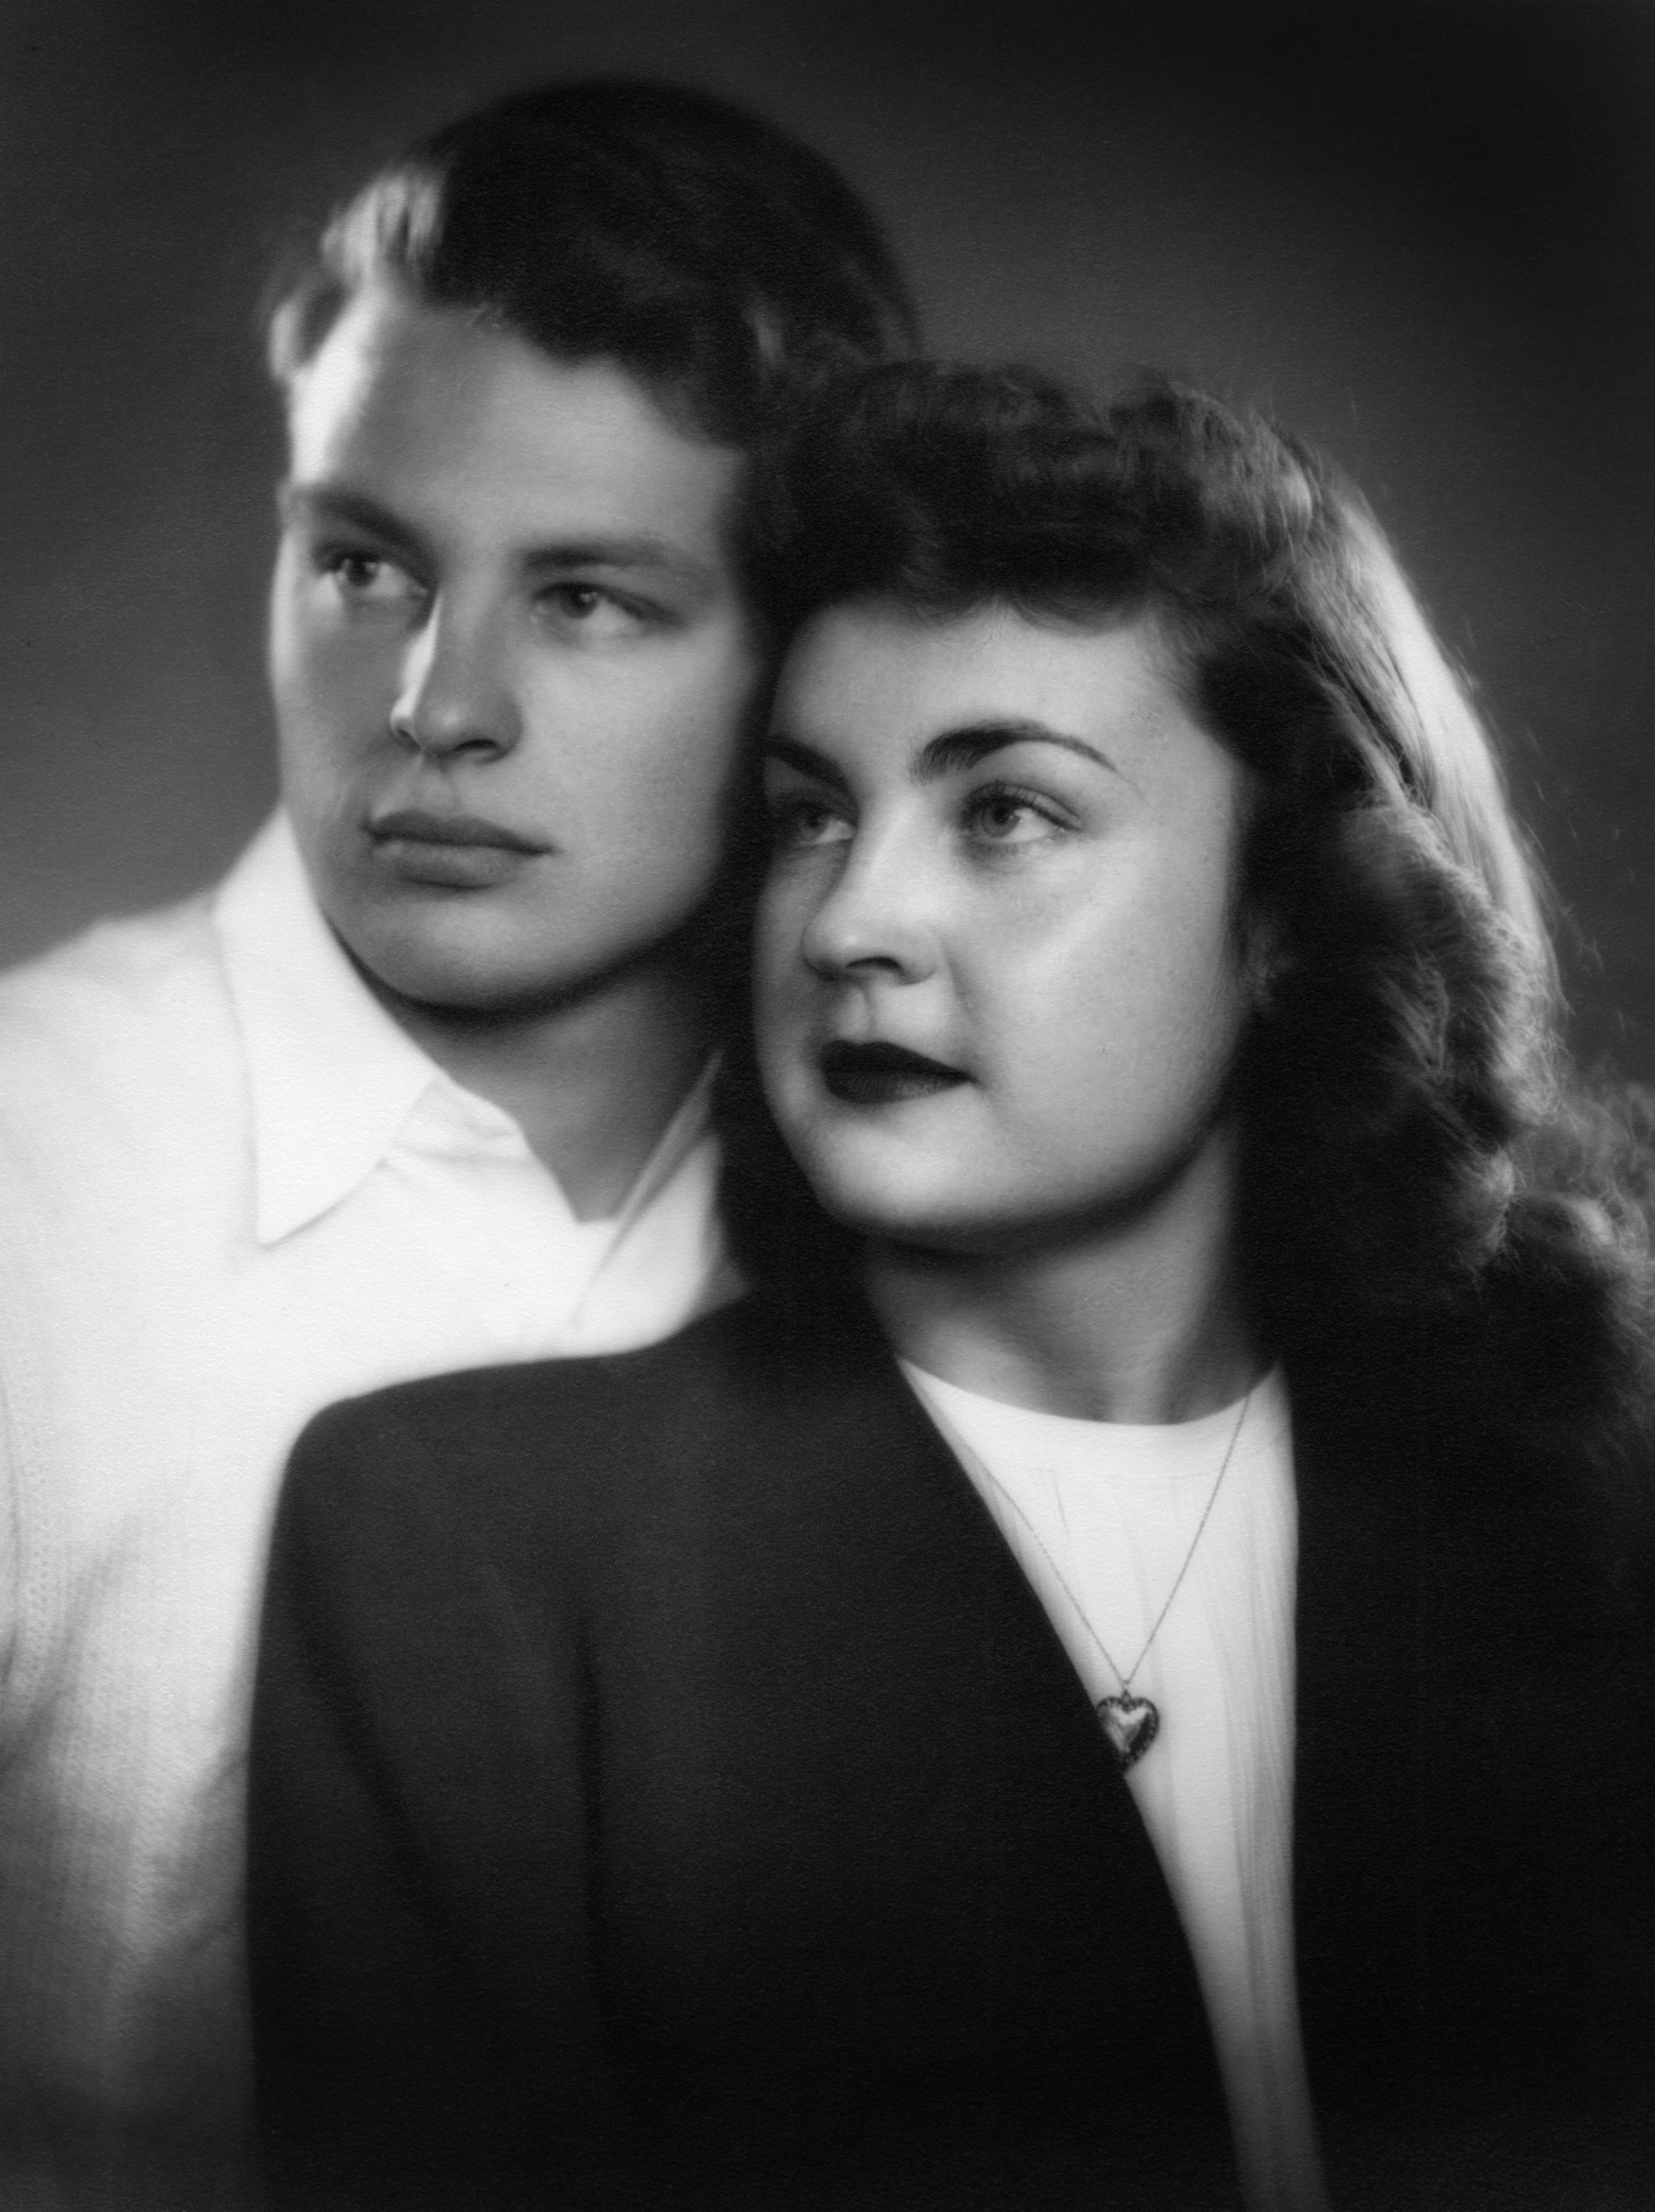 Jan and Bud Richter in their youth